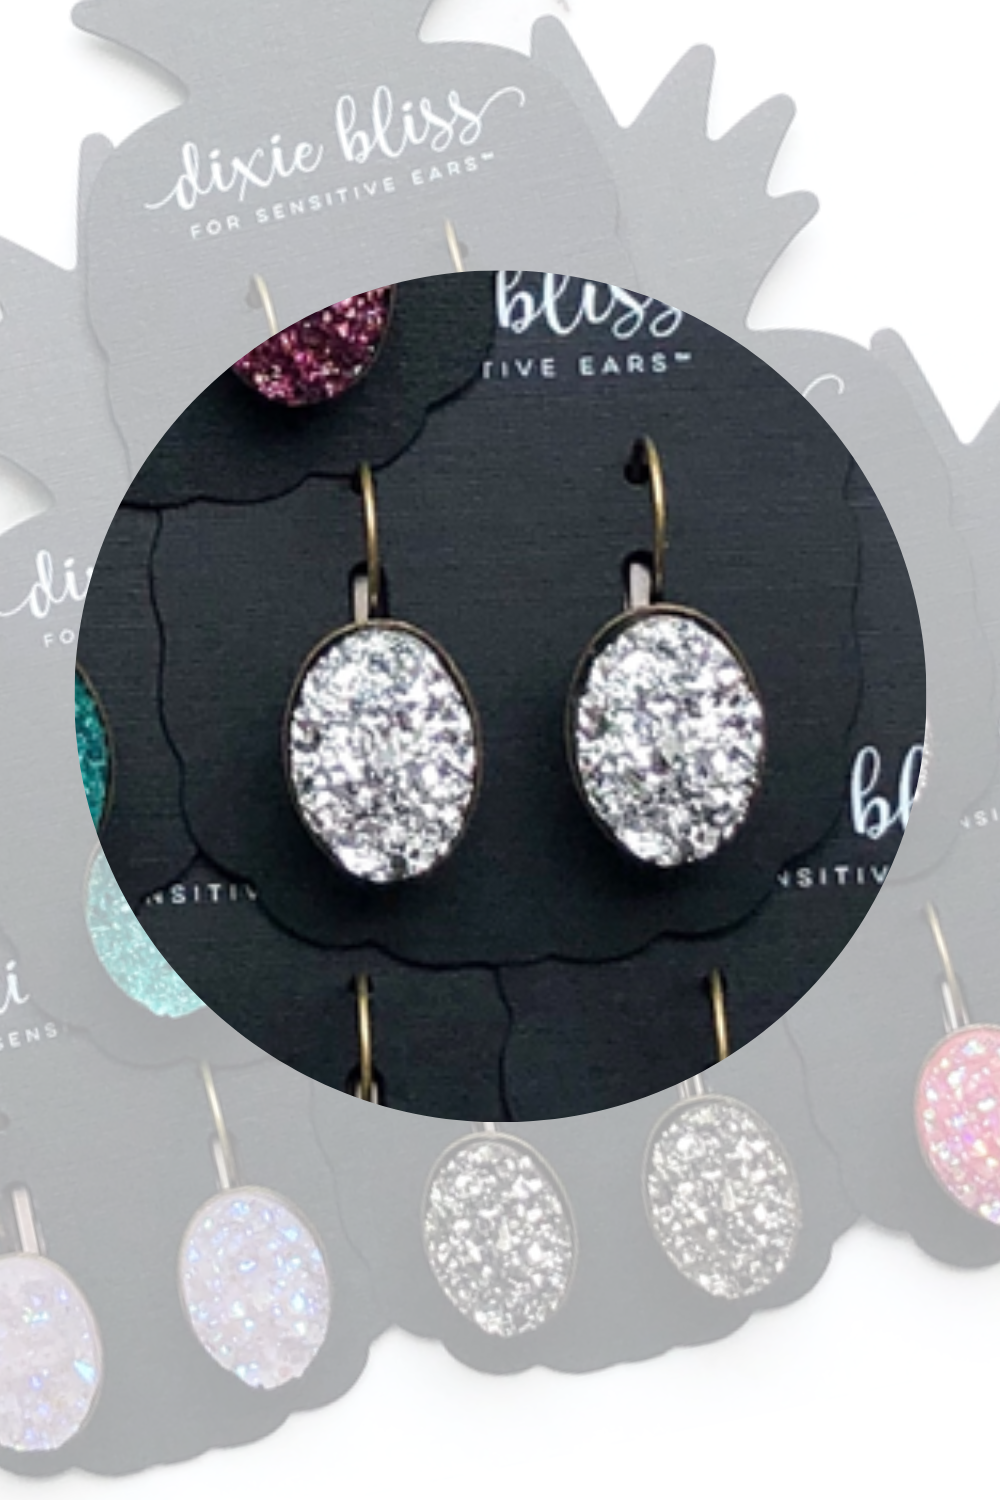 Dixie Bliss Earrings: Brilliant Lever Backs Hypoallergenic made in the USA woman-owned company druzy shiny diamond-like sparkle and shine safe & made for sensitive ears